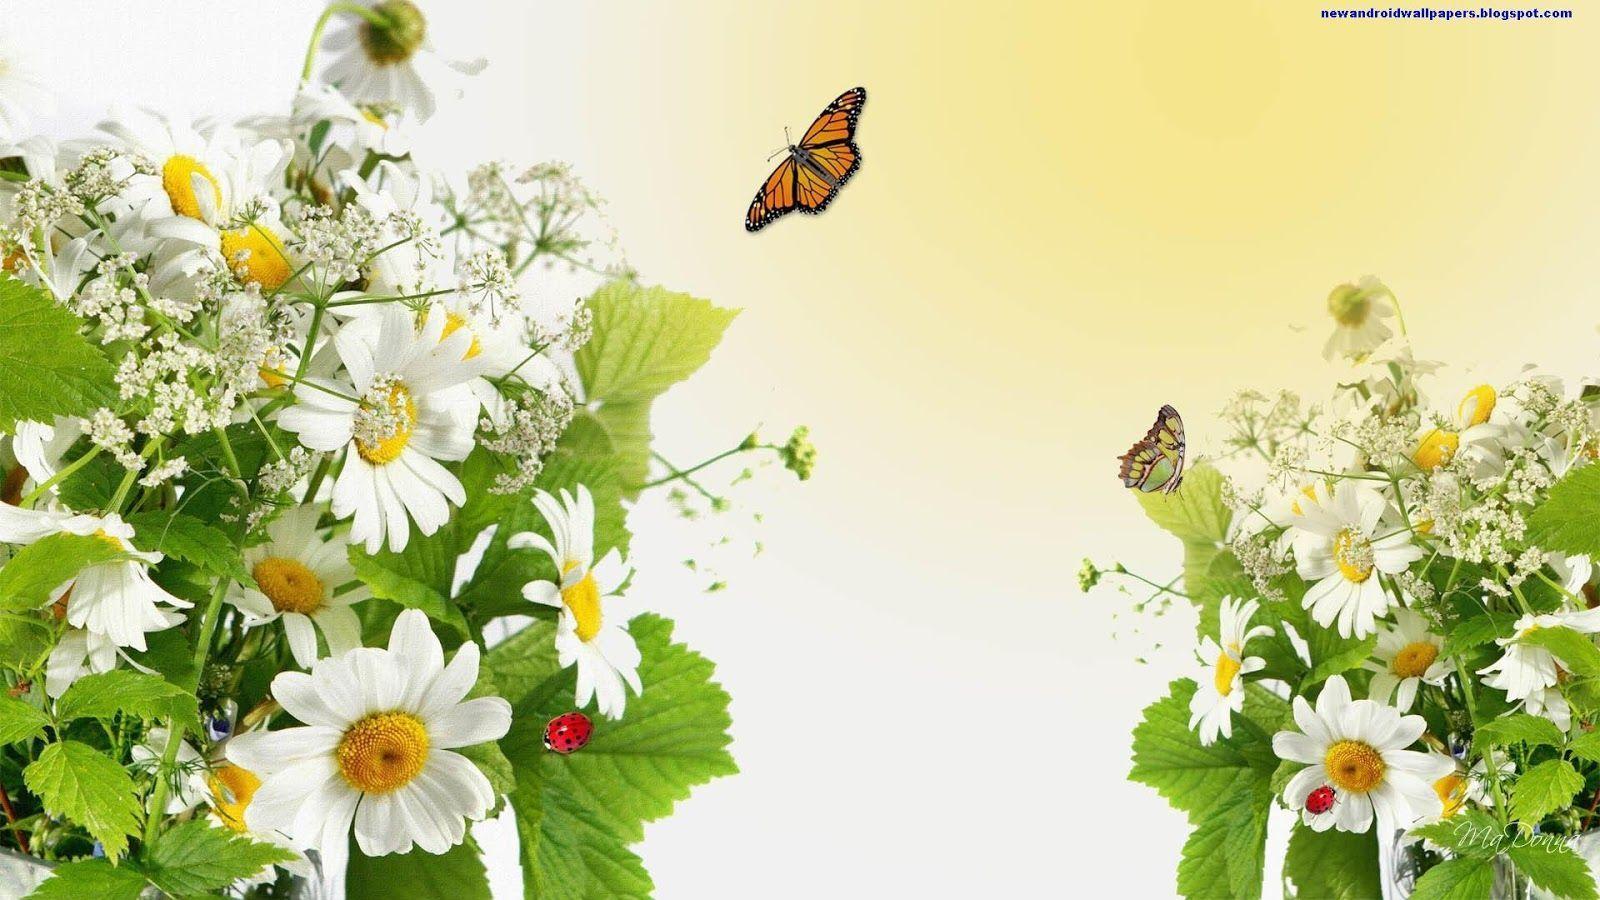 Beatiful Butterflfy On Flowers Wallpaper 2013 HD For Android